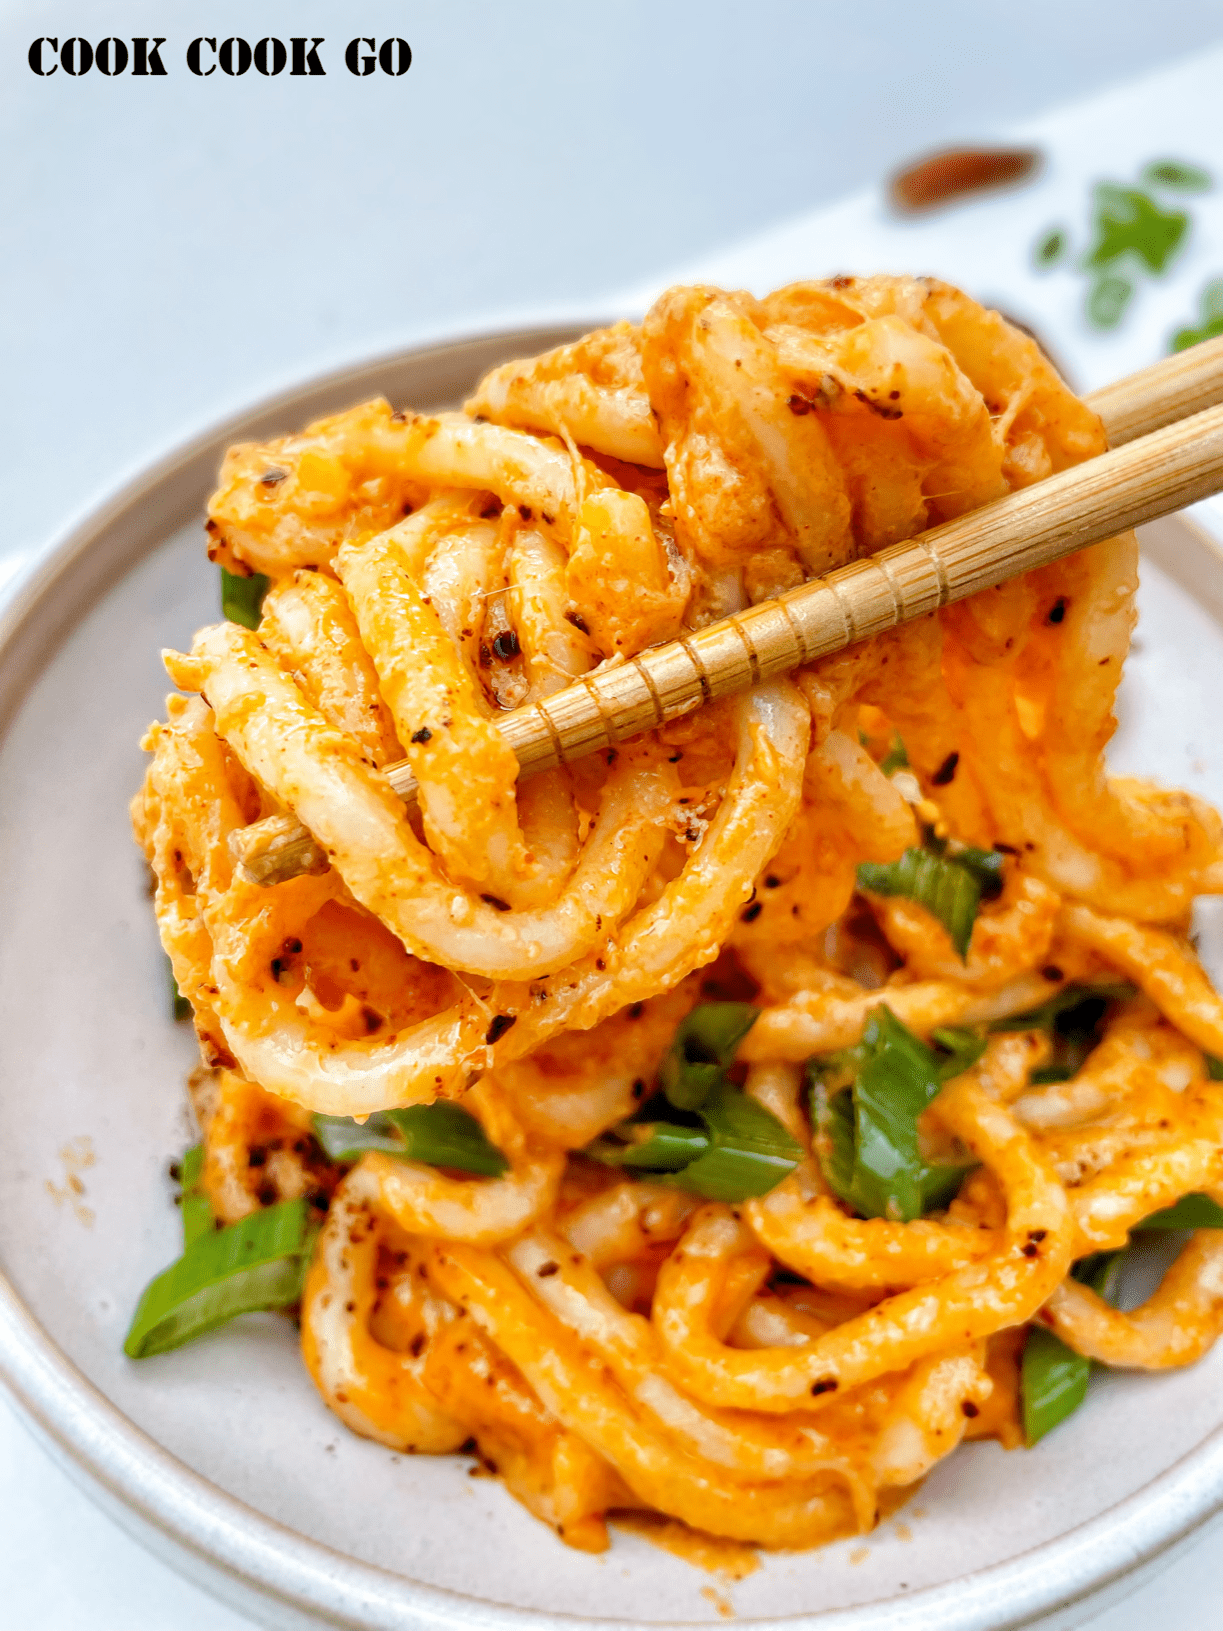 Chili Cheese Udon Noodles